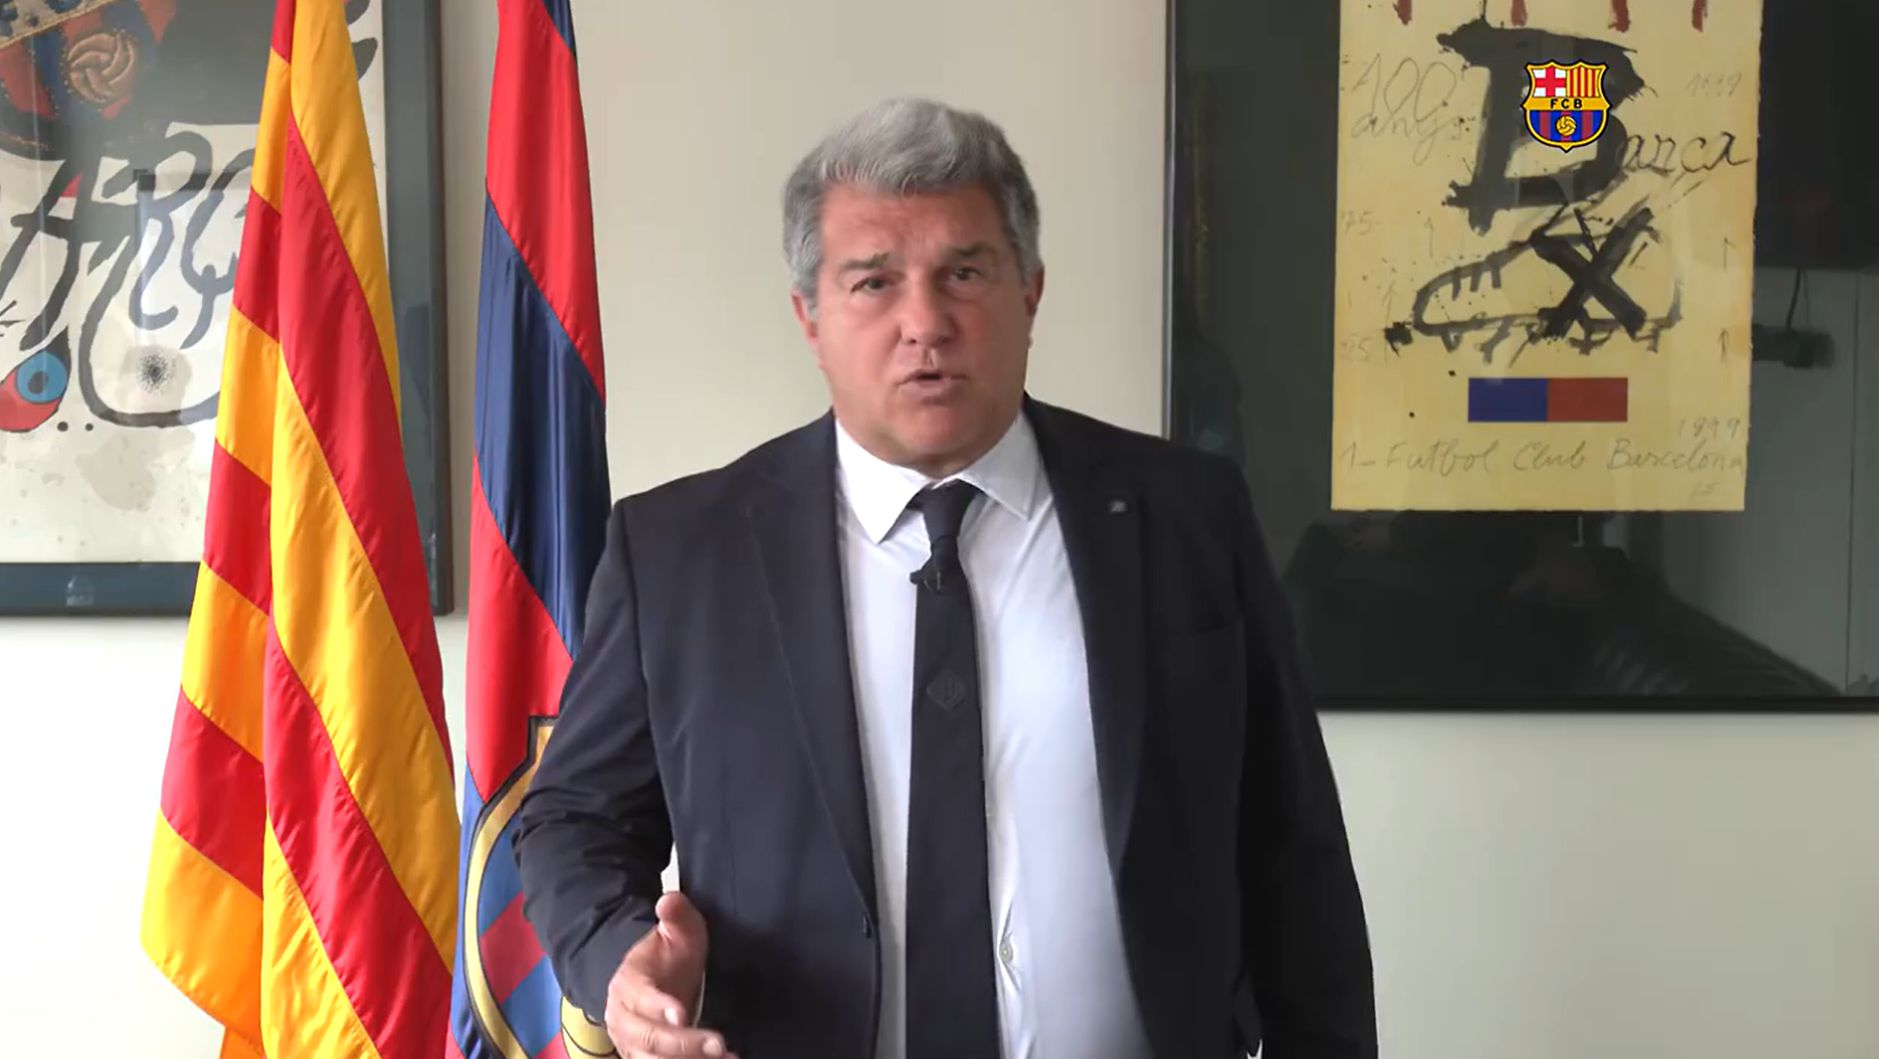 Barcelona President Joan Laporta puts Clasico replay on the table due to ghost goal – cites precedent